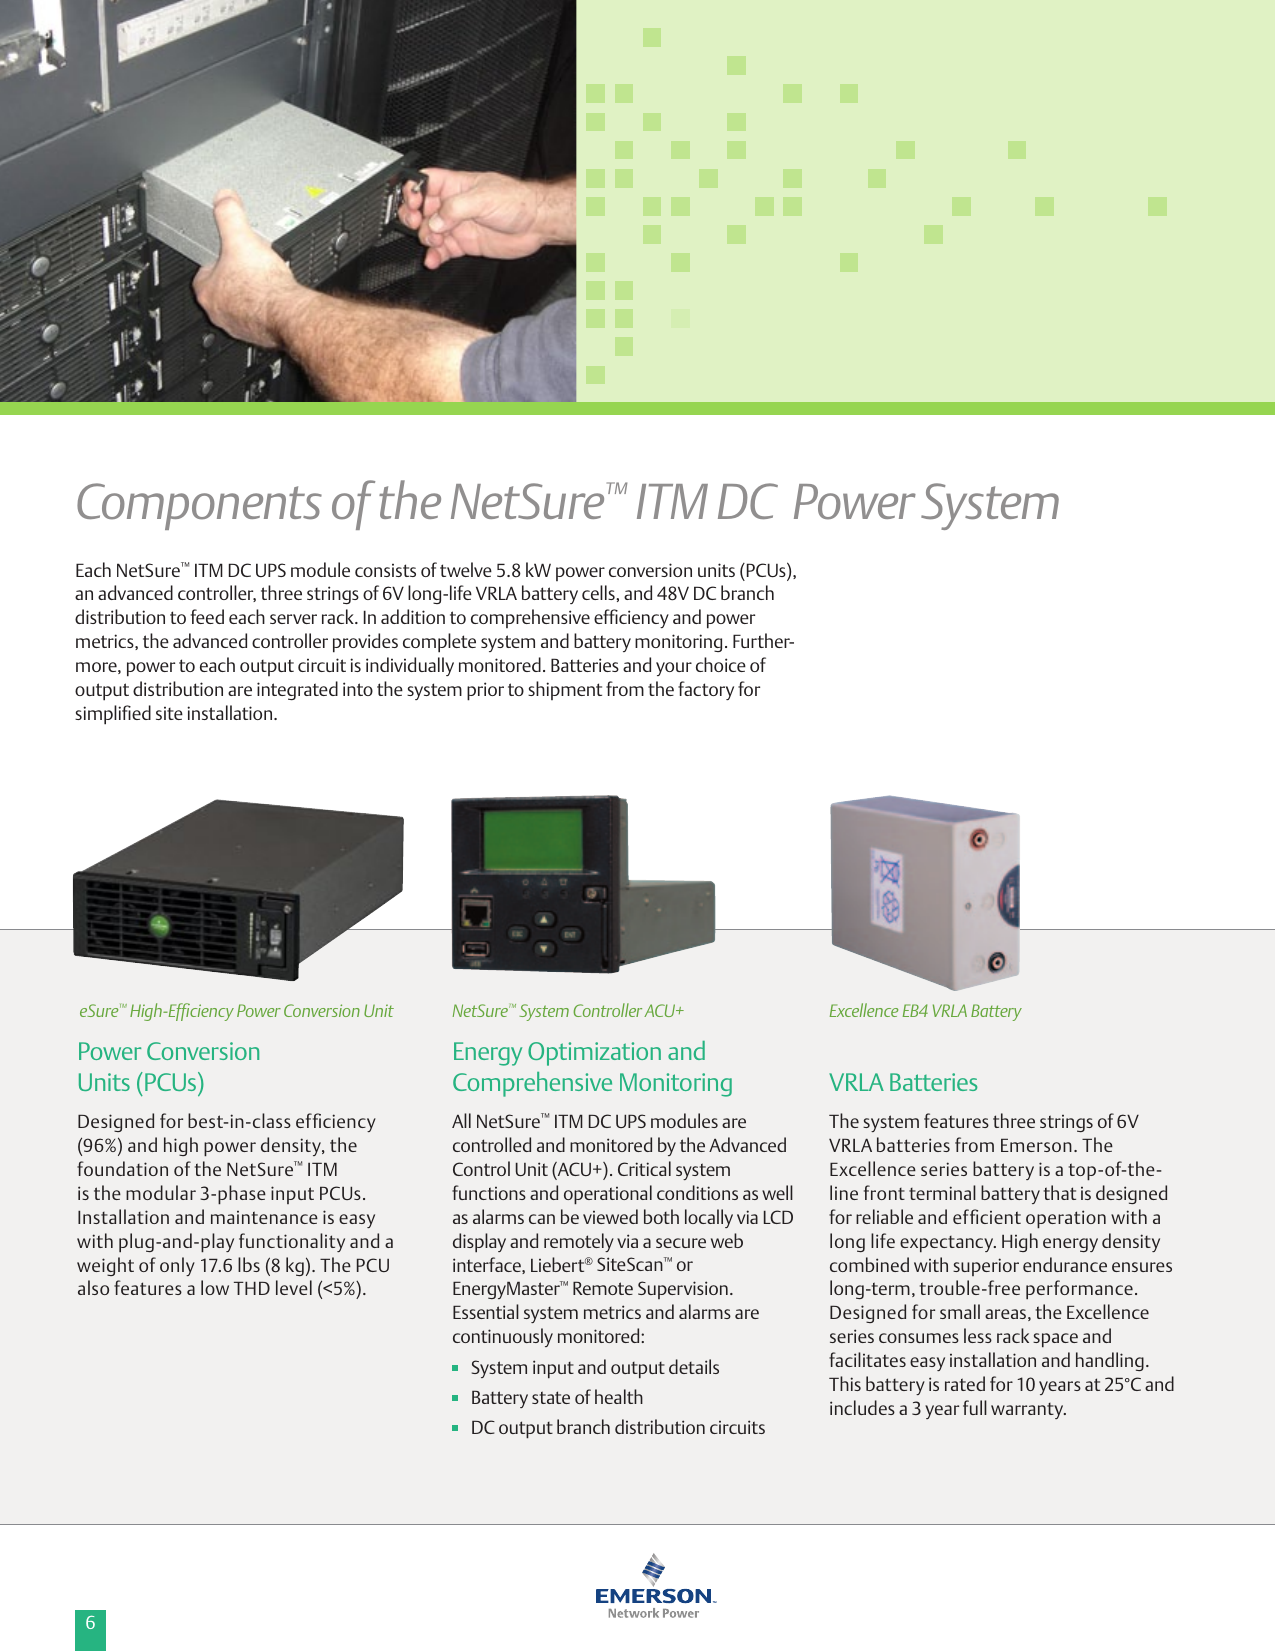 Page 6 of 12 - Emerson Emerson-Netsure-Itm-48-Vdc-Ups-70-Kw-To-280-Kw-Brochure-  Emerson-netsure-itm-48-vdc-ups-70-kw-to-280-kw-brochure